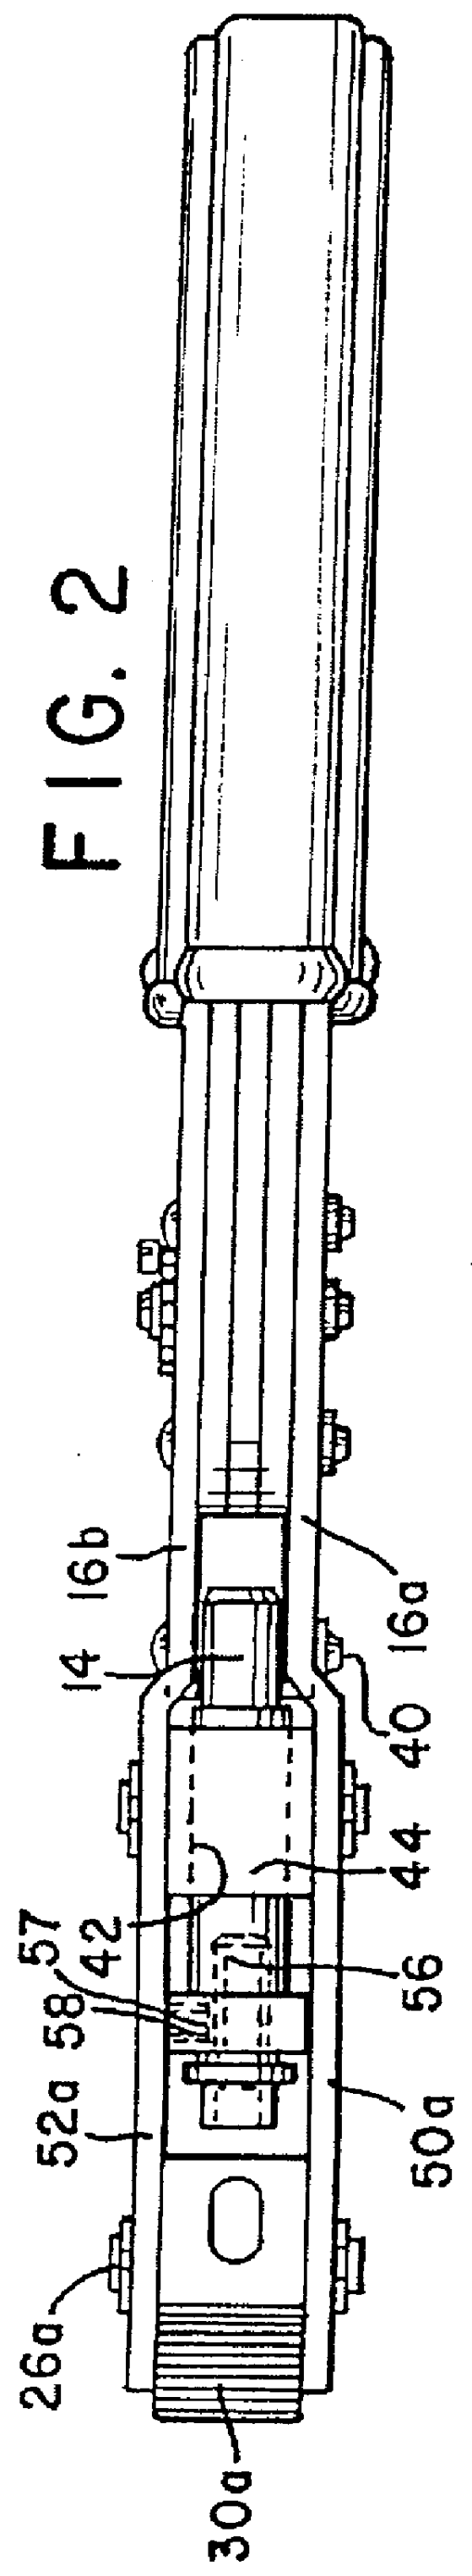 Radial taper tool for compressing electrical connectors